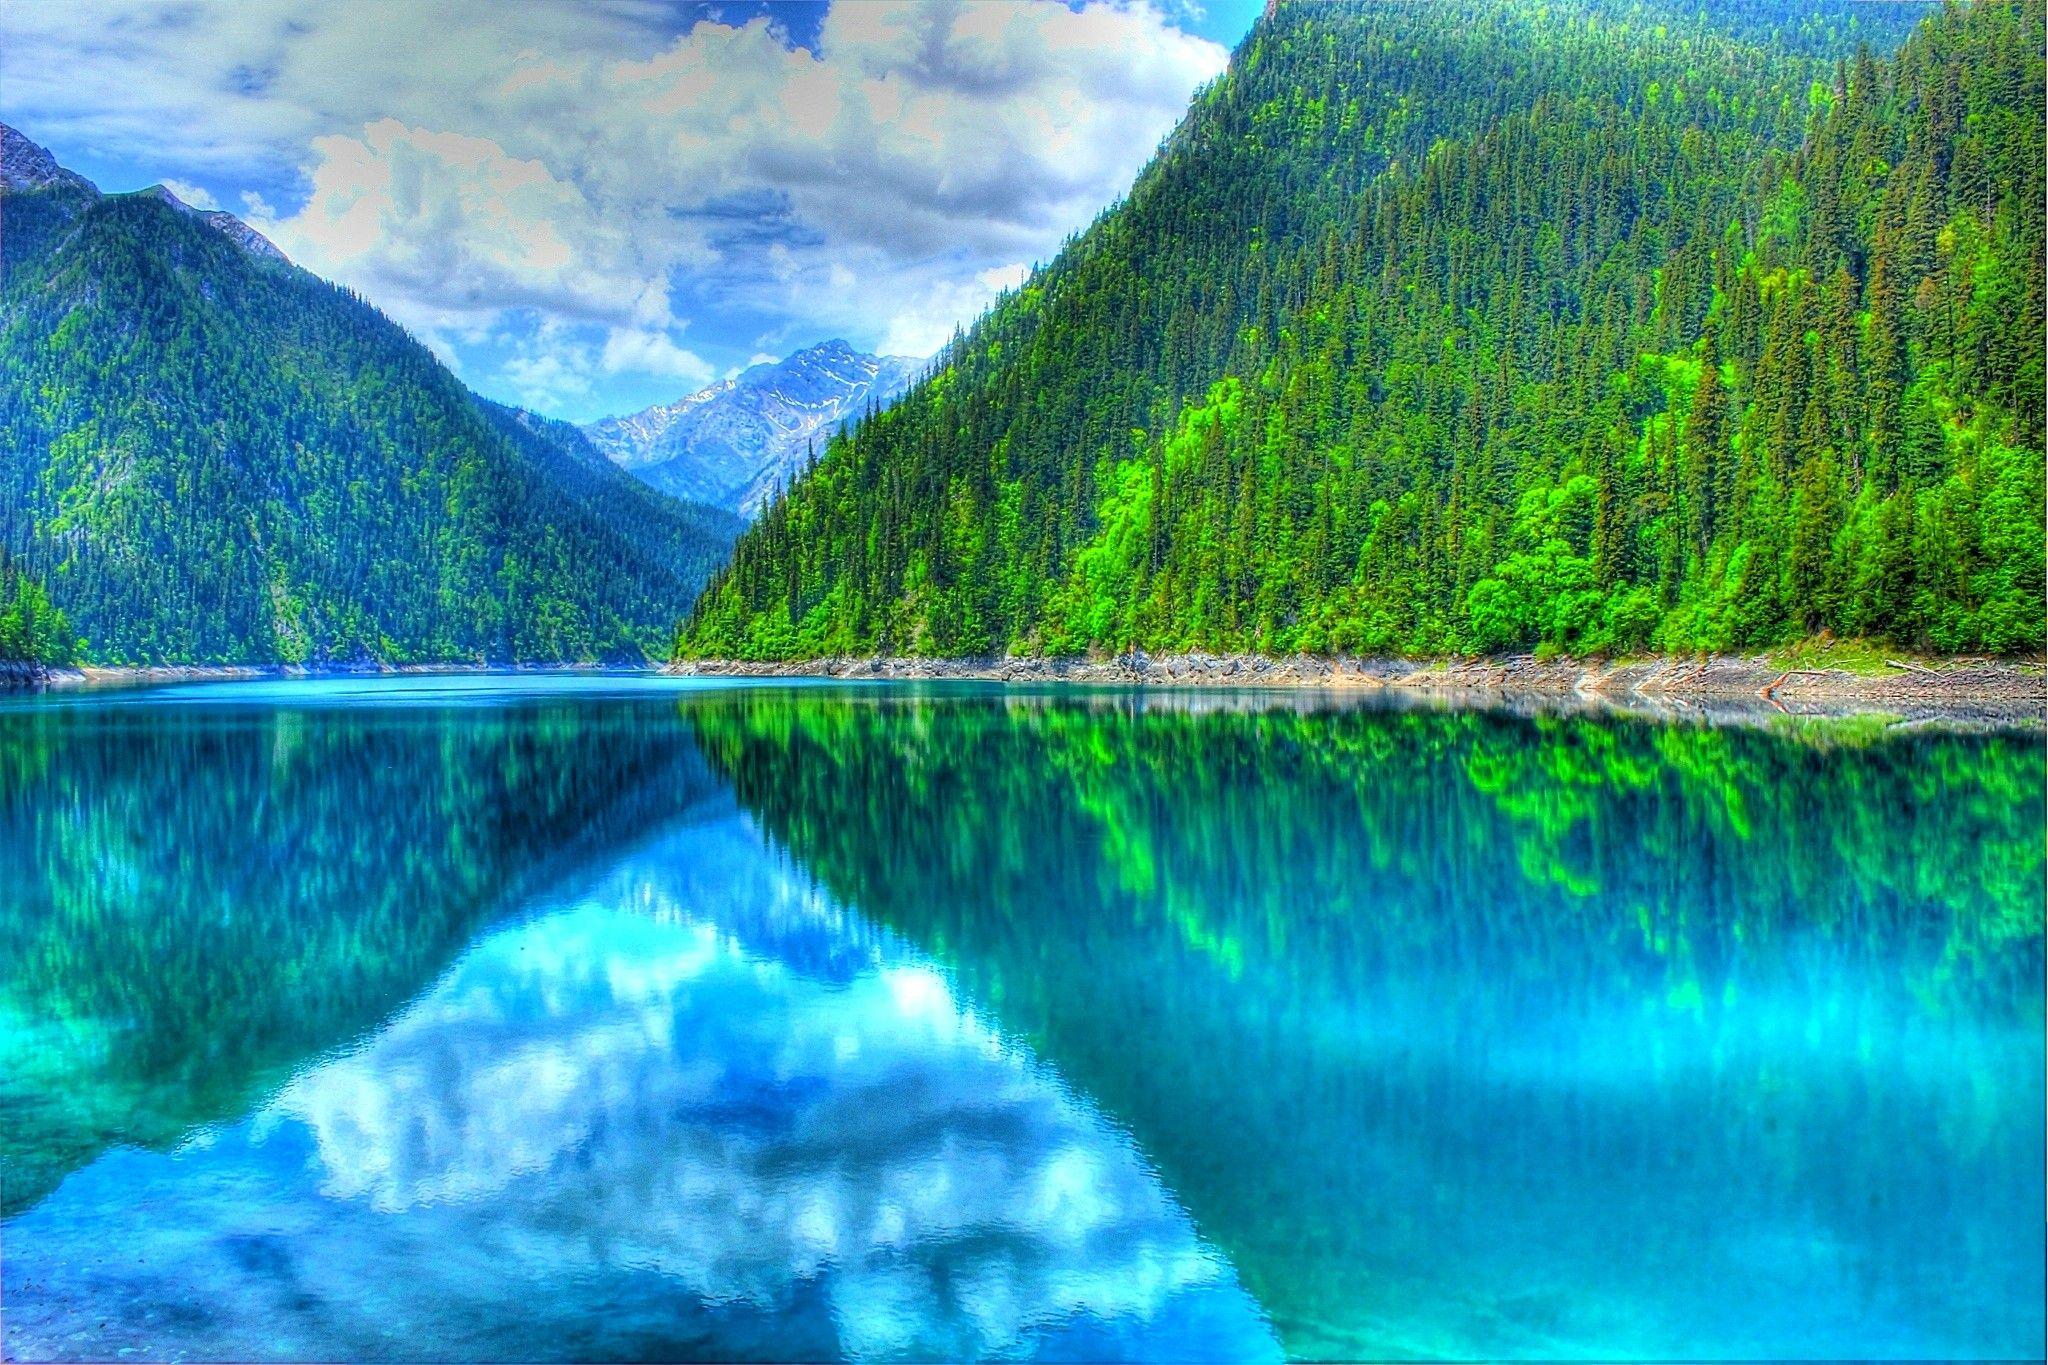 Lakes: Reflection Forest Valley Summer China Park Turquoise